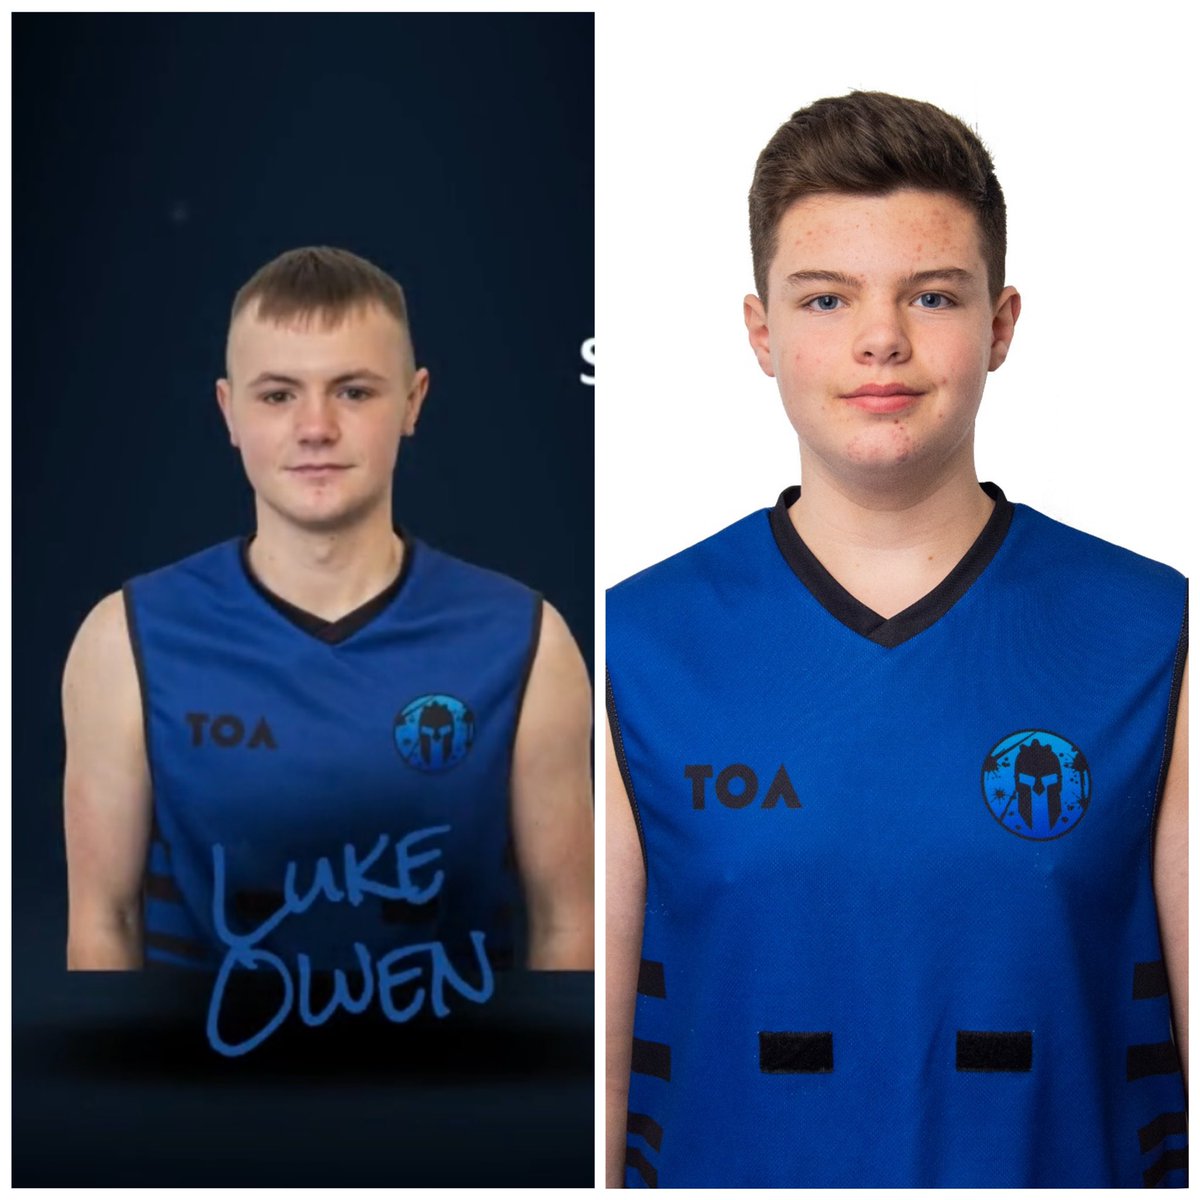 Congratulations to our two youngest Manchester Spartans, Luke Owen and @James_F123 who have been selected to represent England at netball in the England Thorns Mens Squad. We are proud of you both. @MensNw @mcrflava #emmna #mensnetball